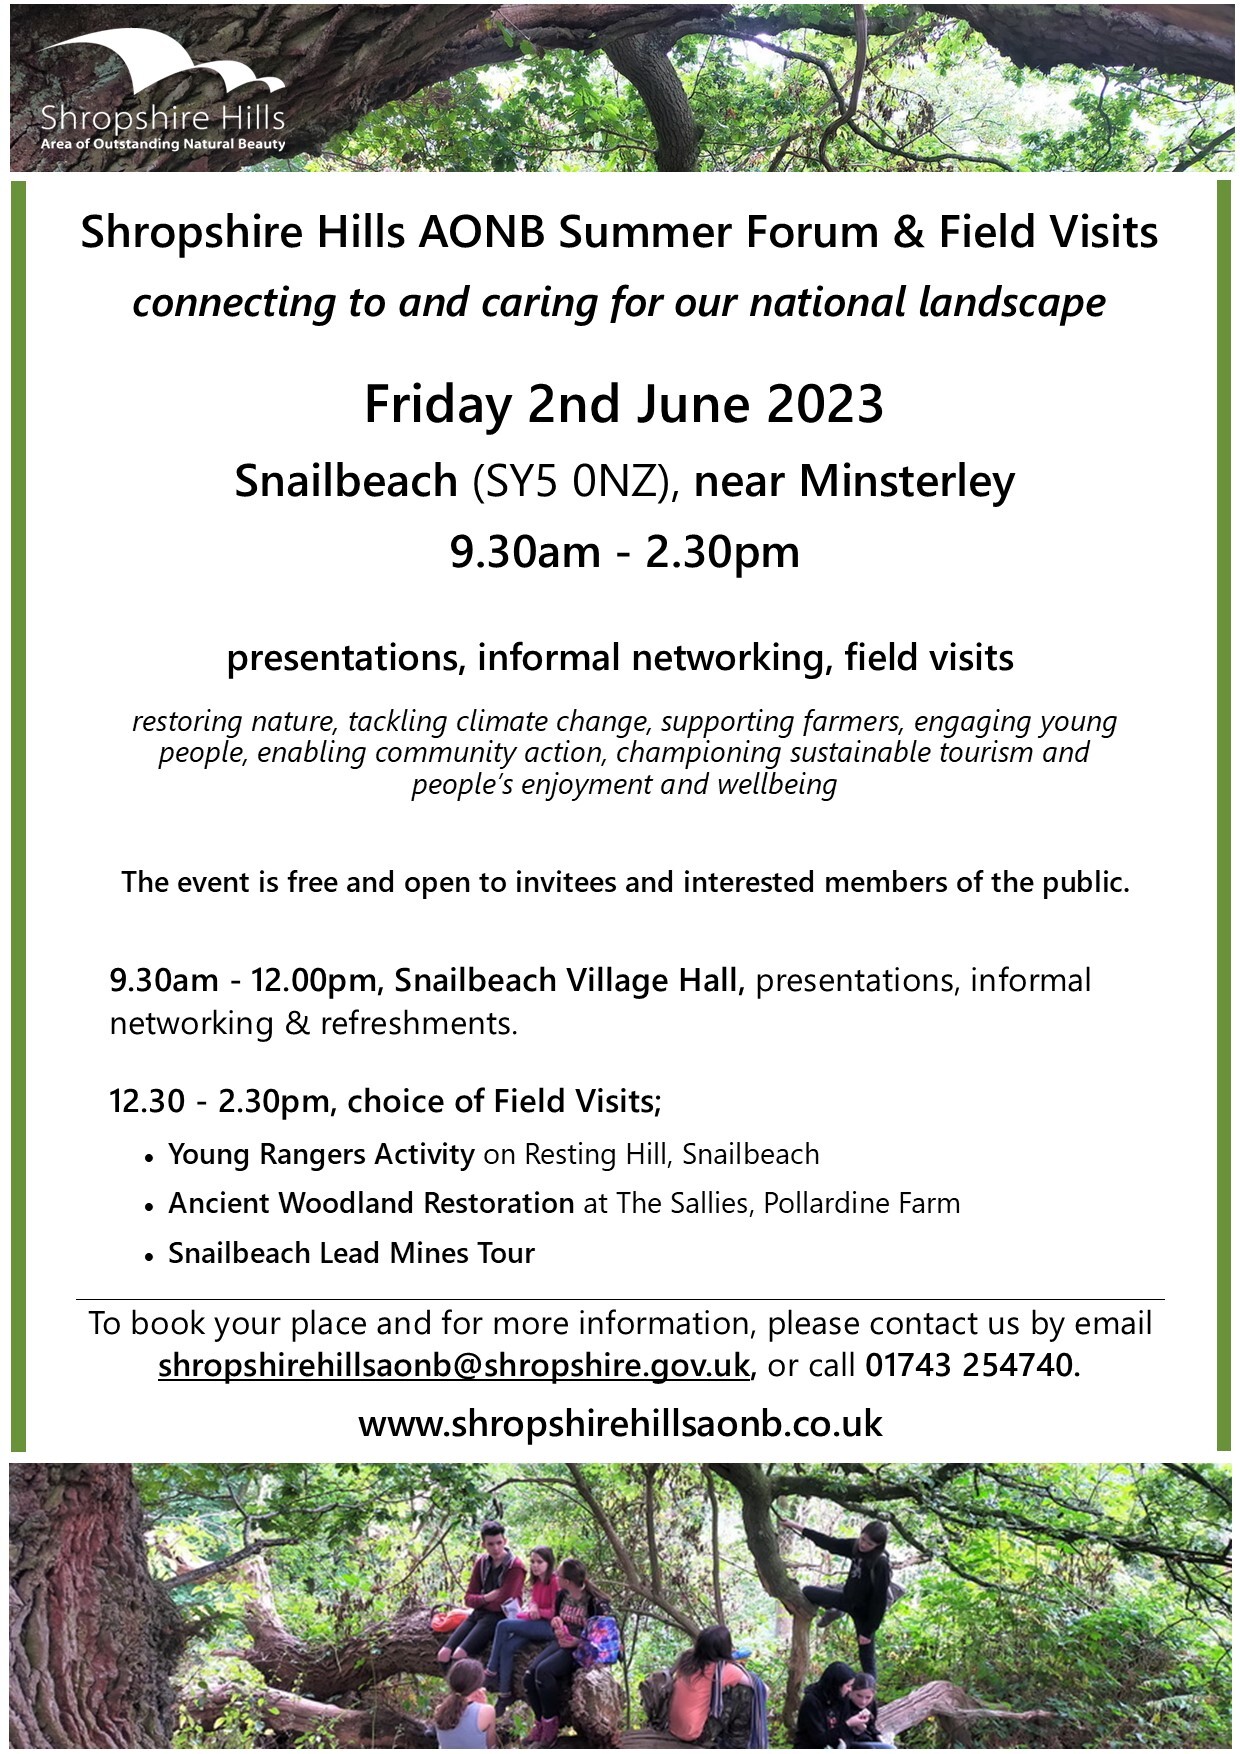 poster with details about the Shropshire Hills Summer Forum on 2nd June 2023